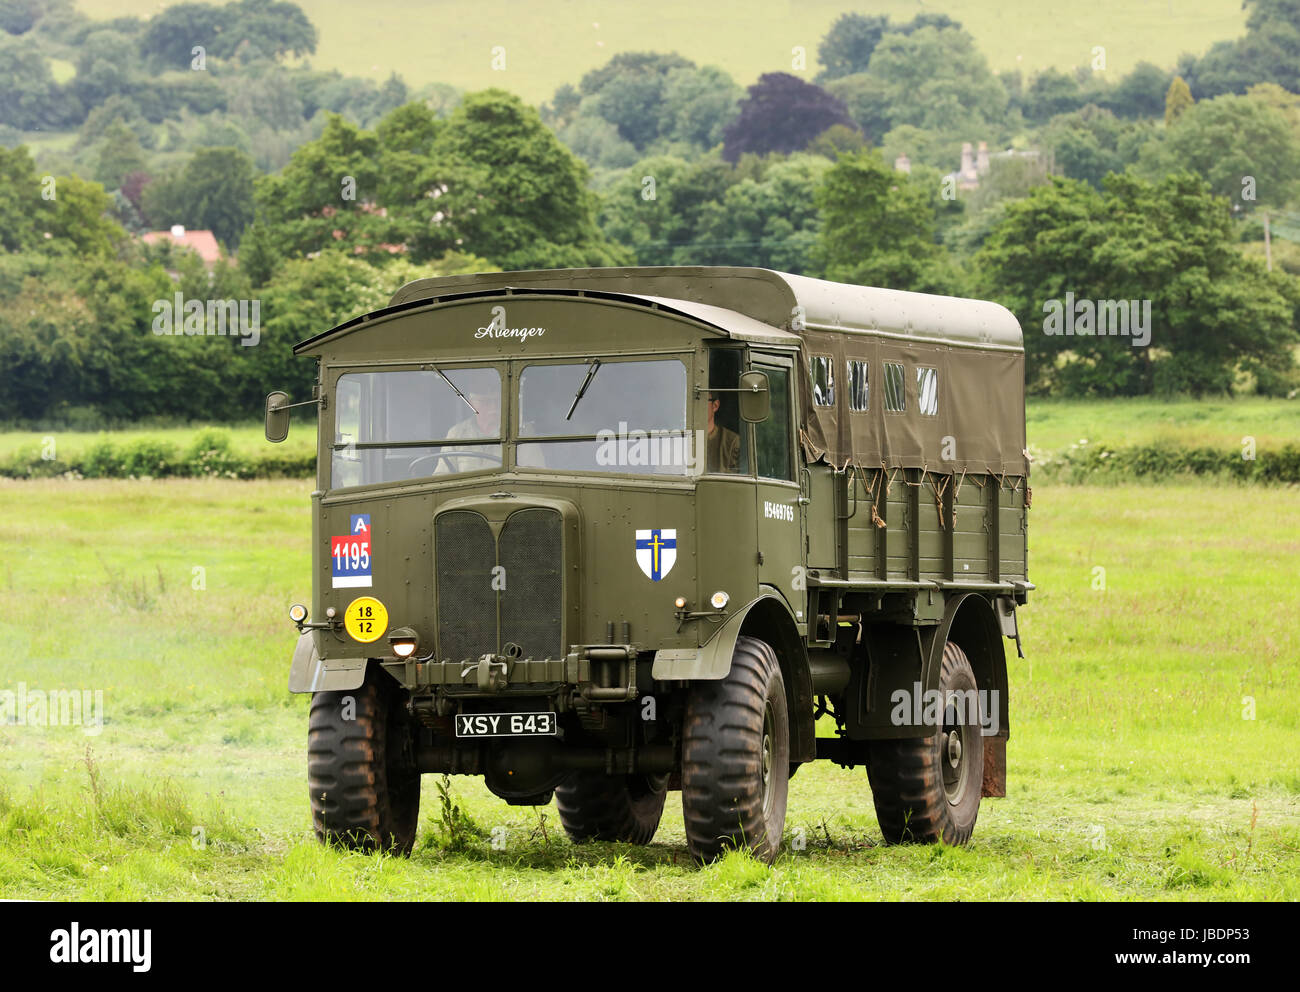 10th June 2017 - War and peace show at Wraxall in North Somerset. England. Stock Photo